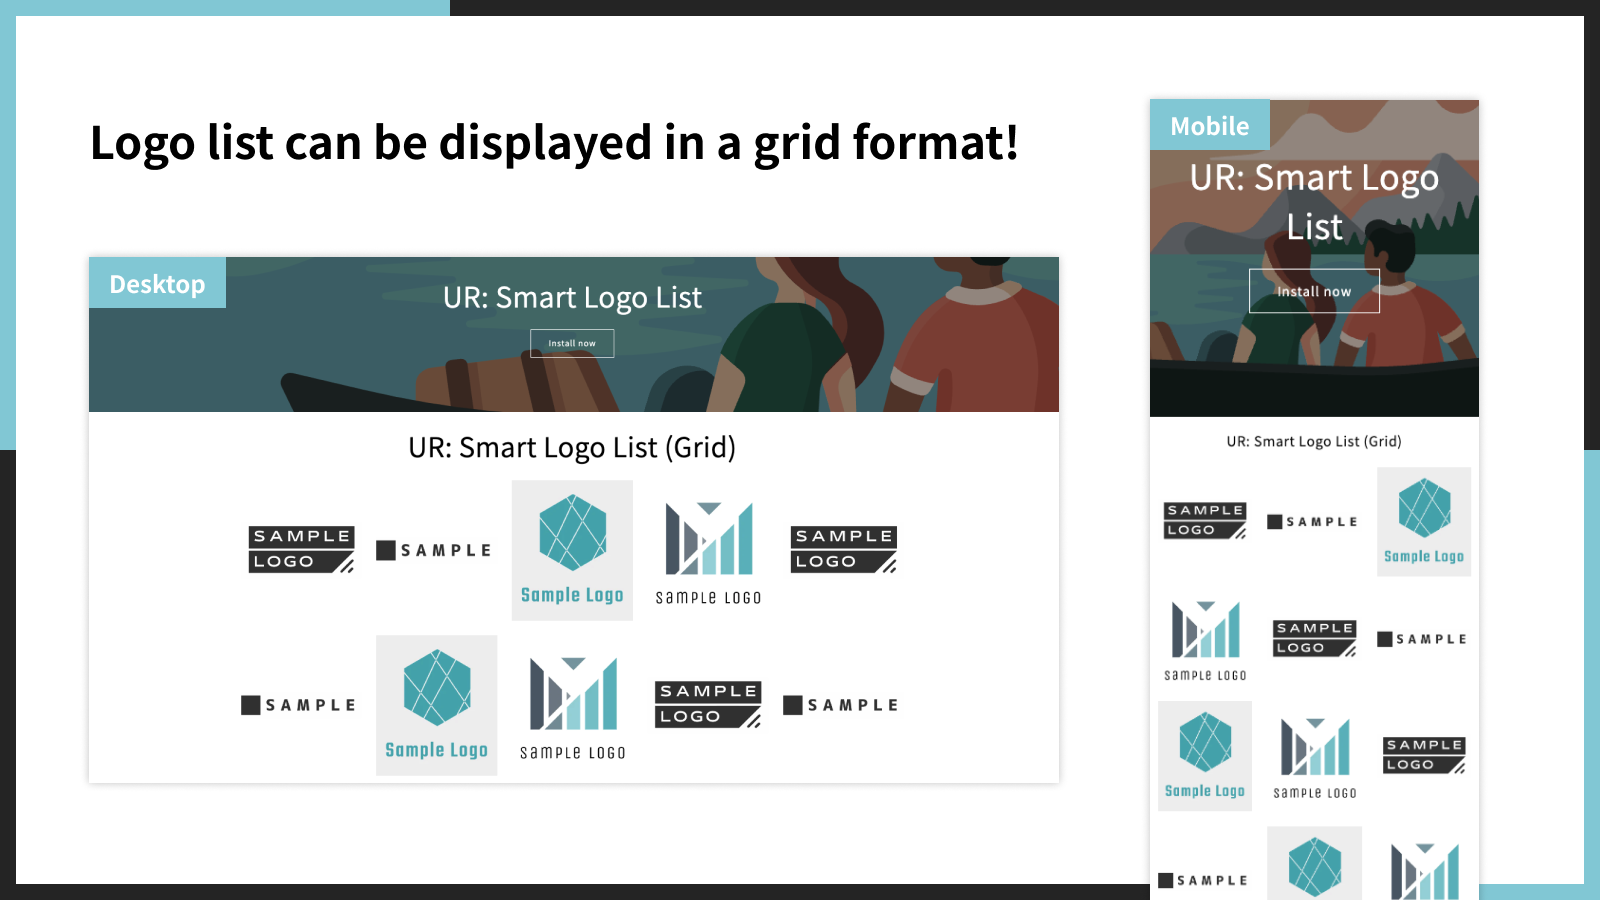 Logo list can be displayed in a grid format!